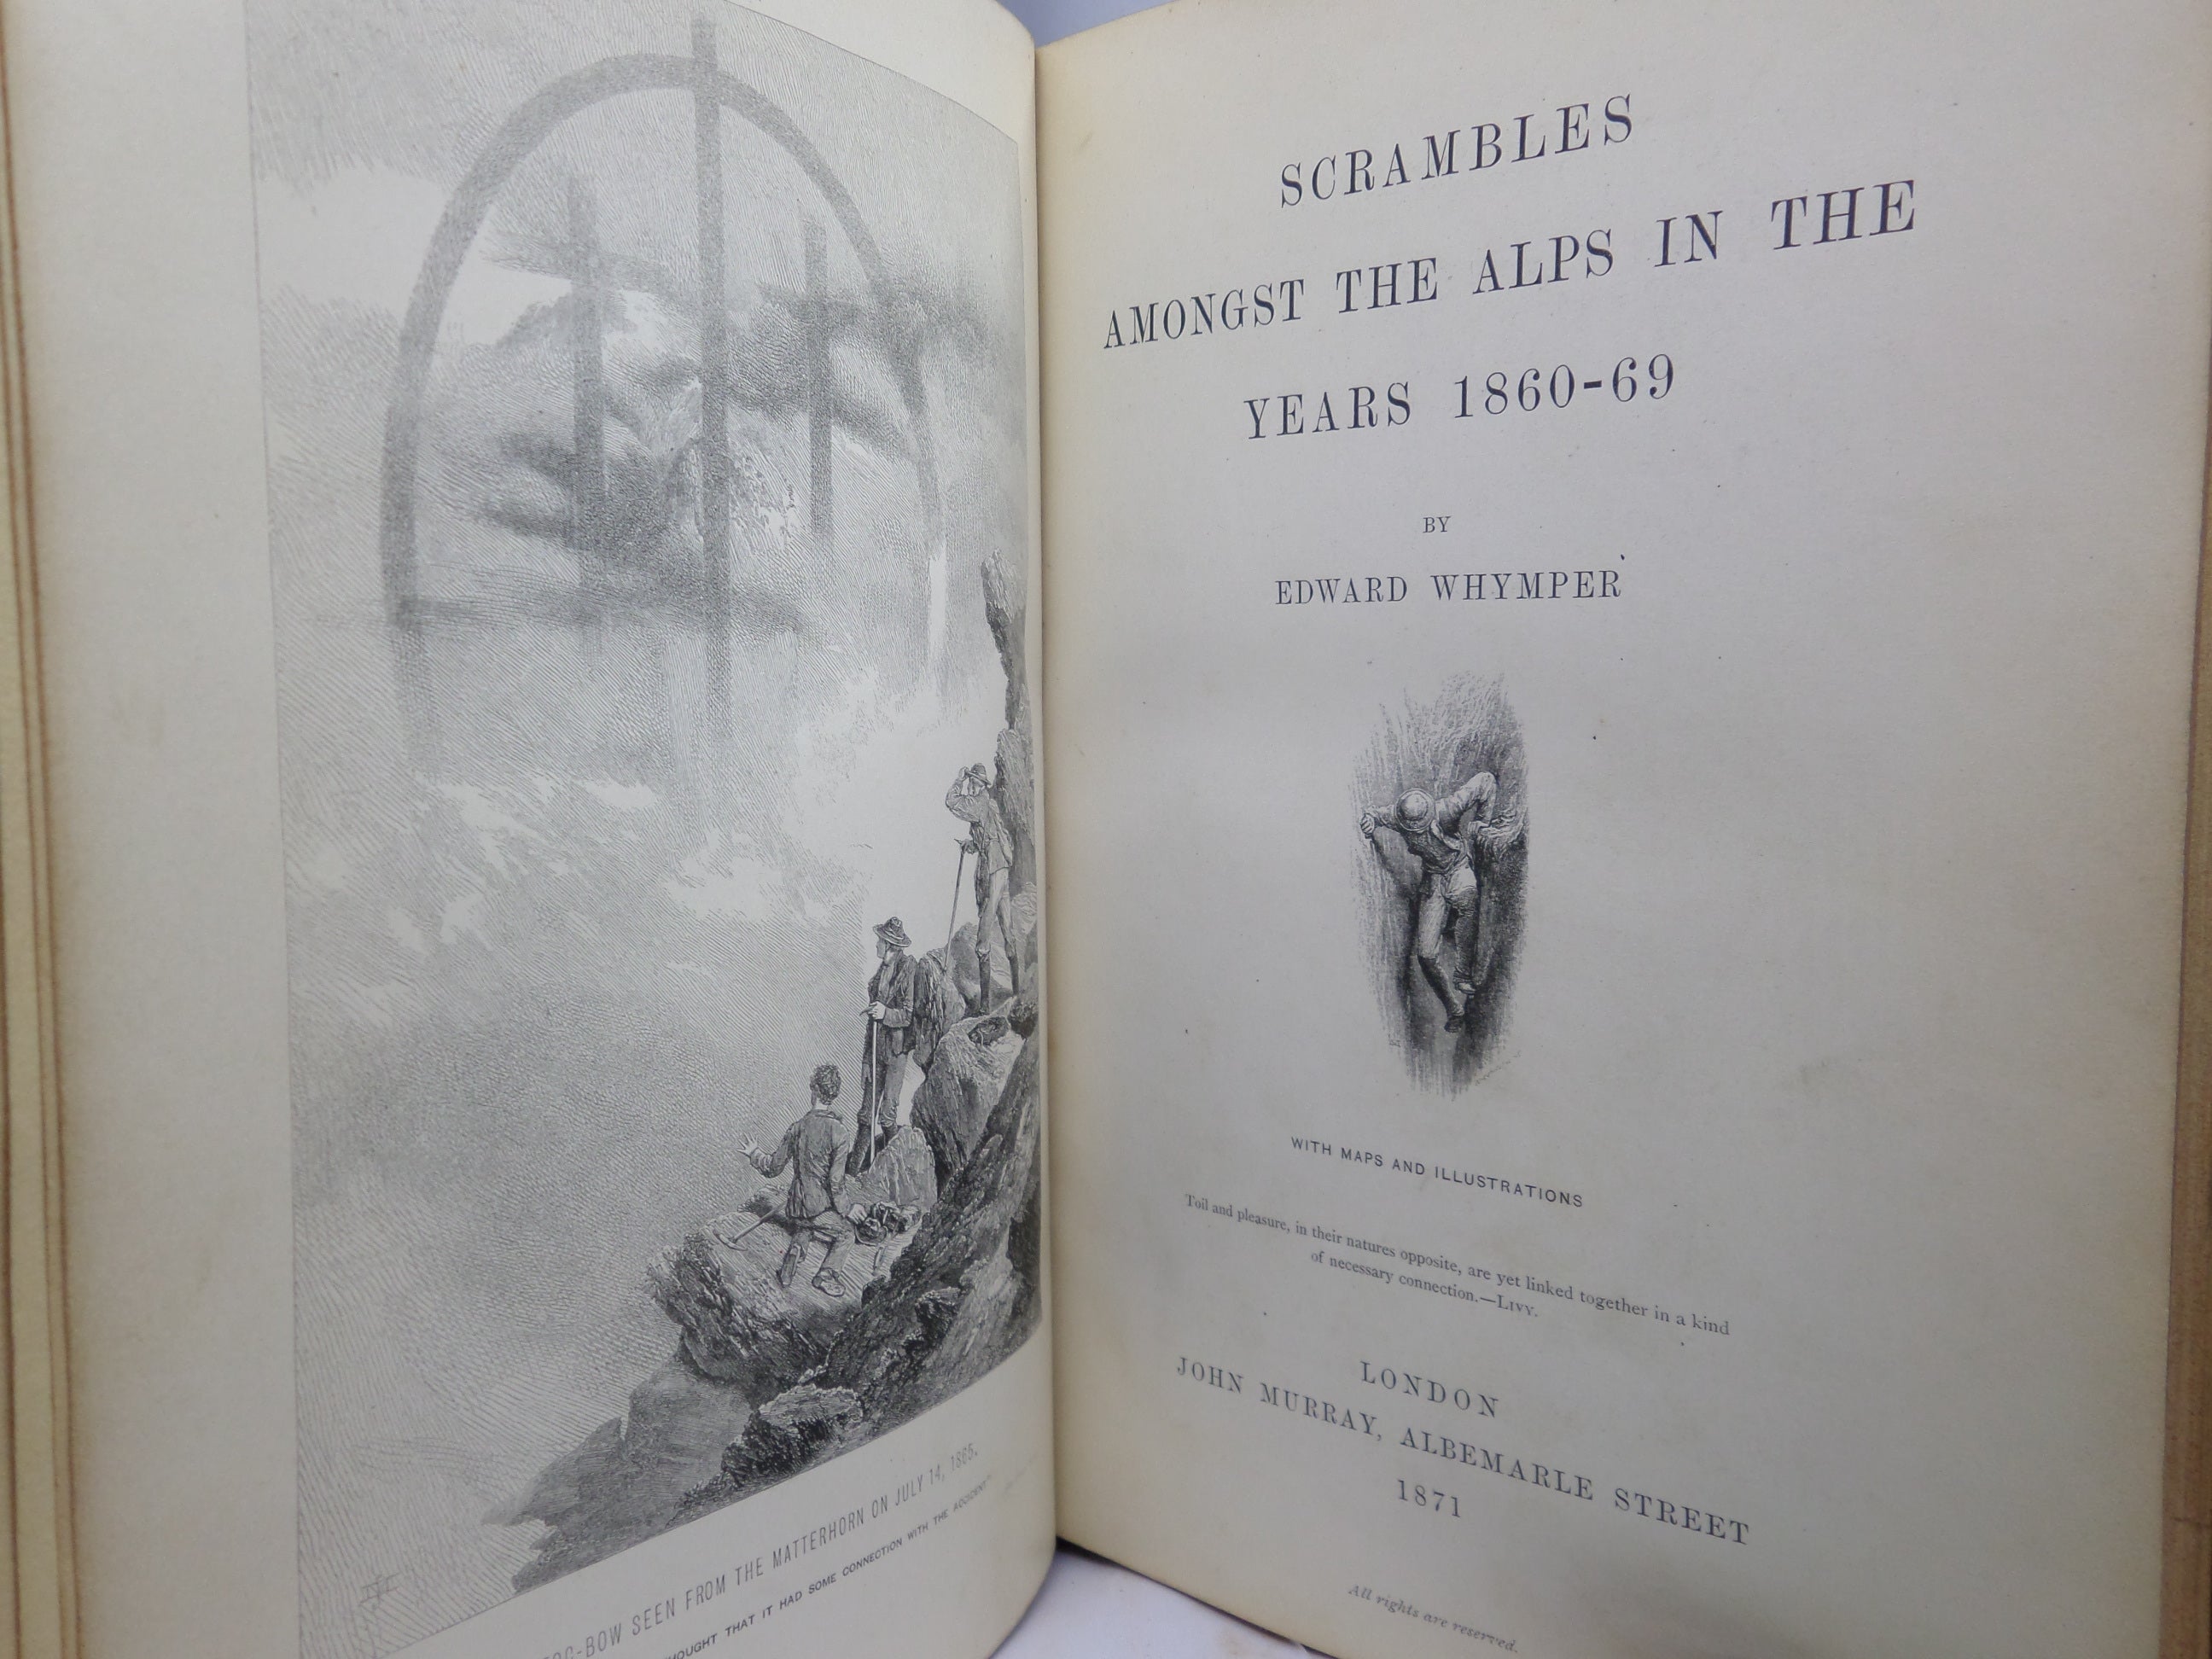 SCRAMBLES AMONGST THE ALPS IN THE YEARS 1860-69 EDWARD WHYMPER 1871 FIRST EDITION